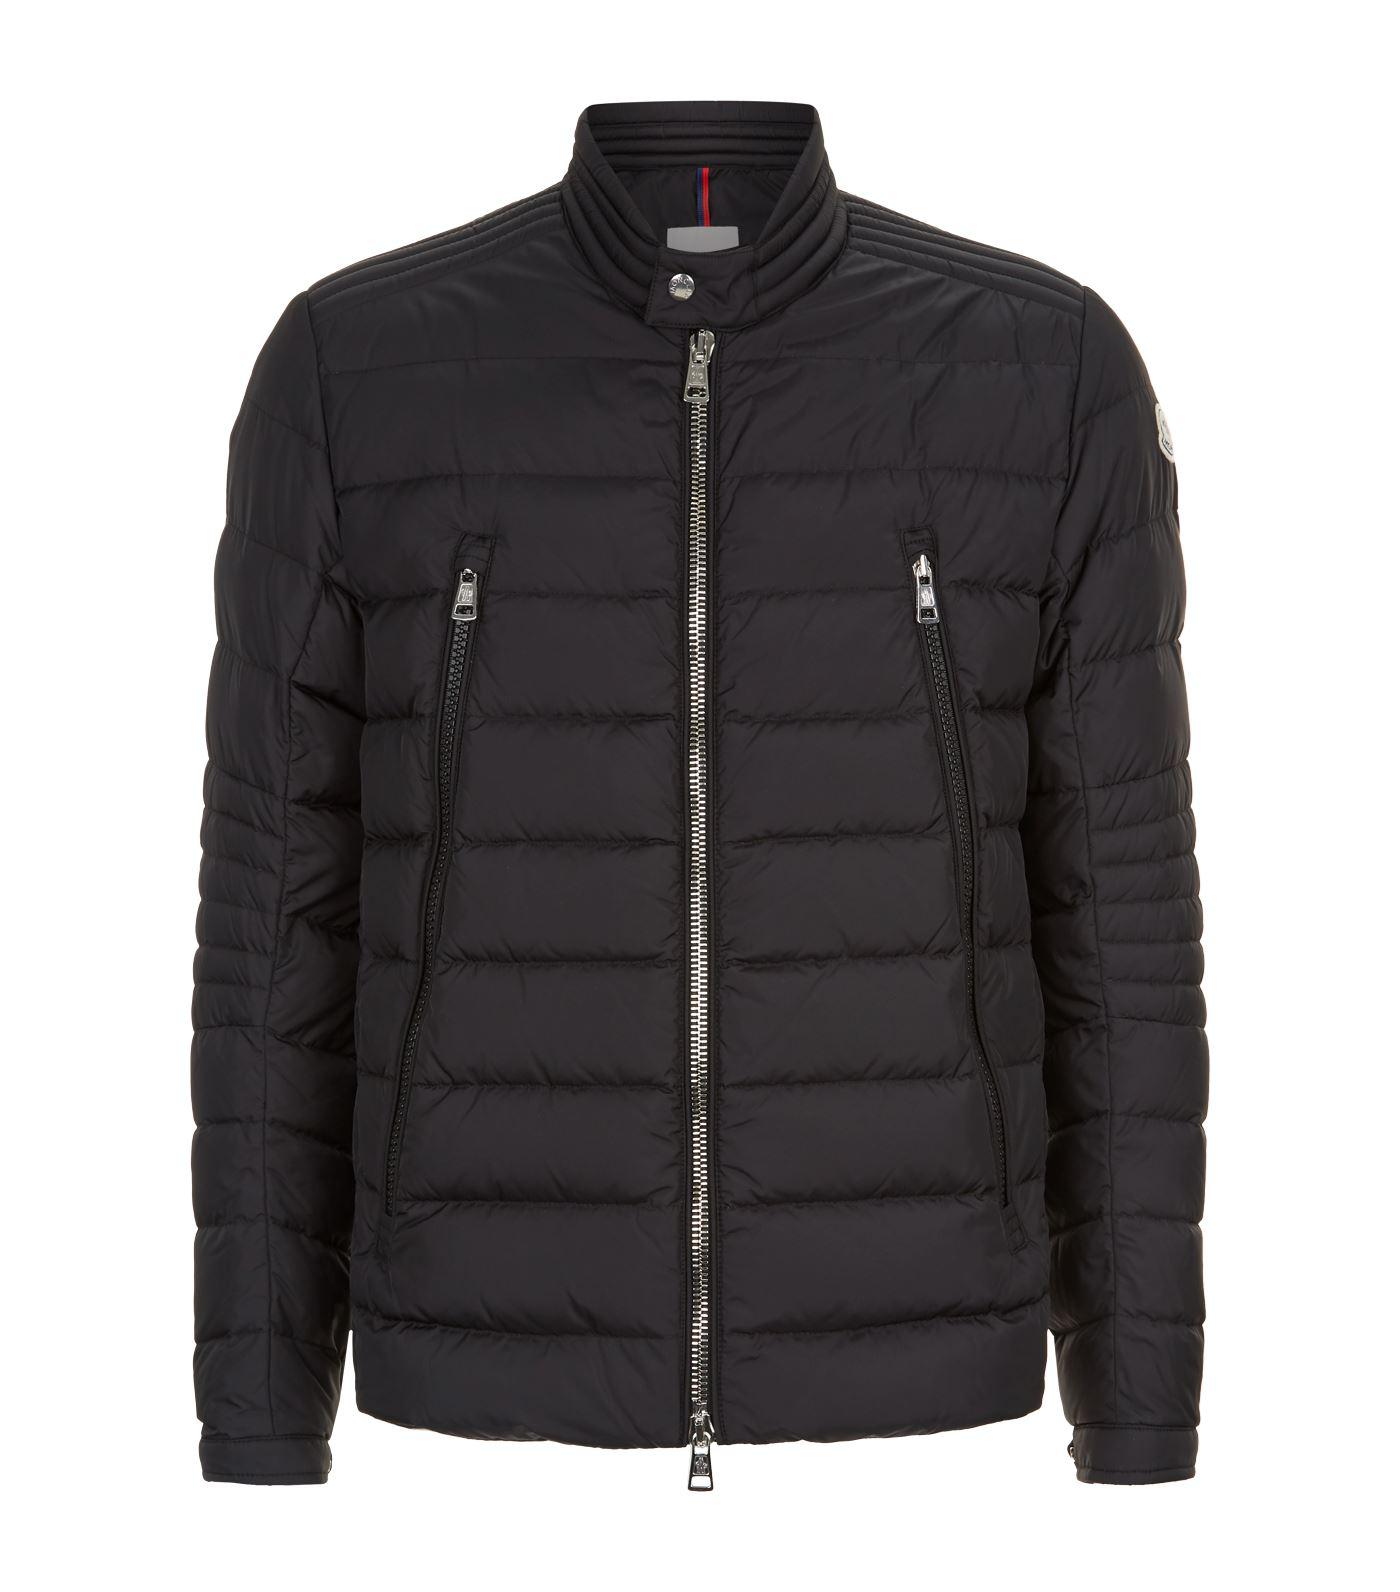 Moncler Amiot Down-flled Quilted Jacket in Black for Men - Lyst